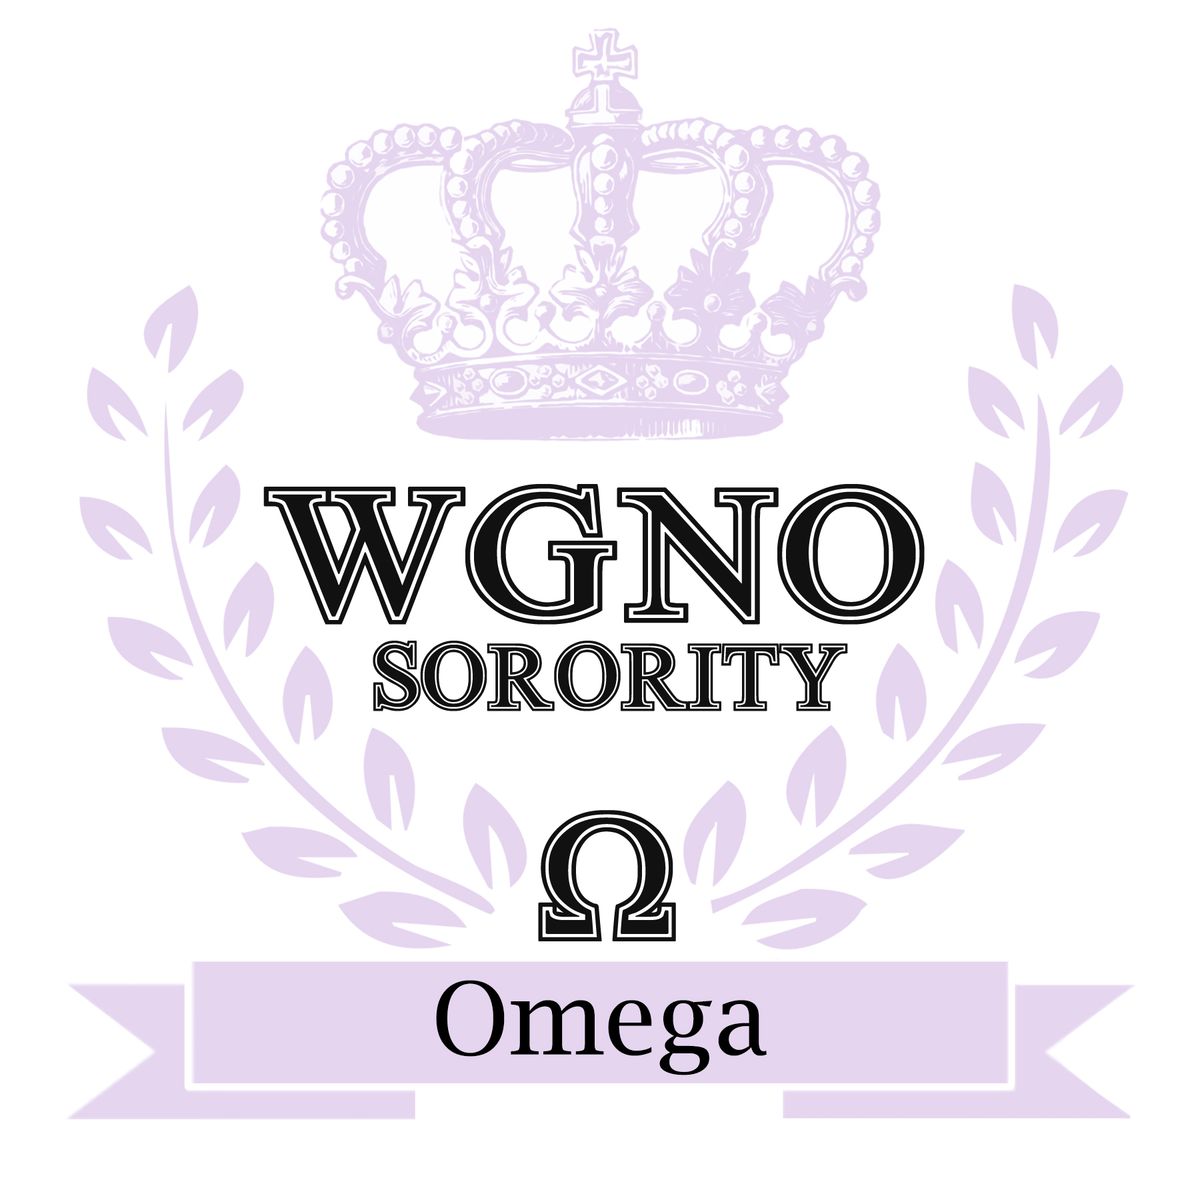 OMEGA CYPRESS 7\/25 Women's Networking Group